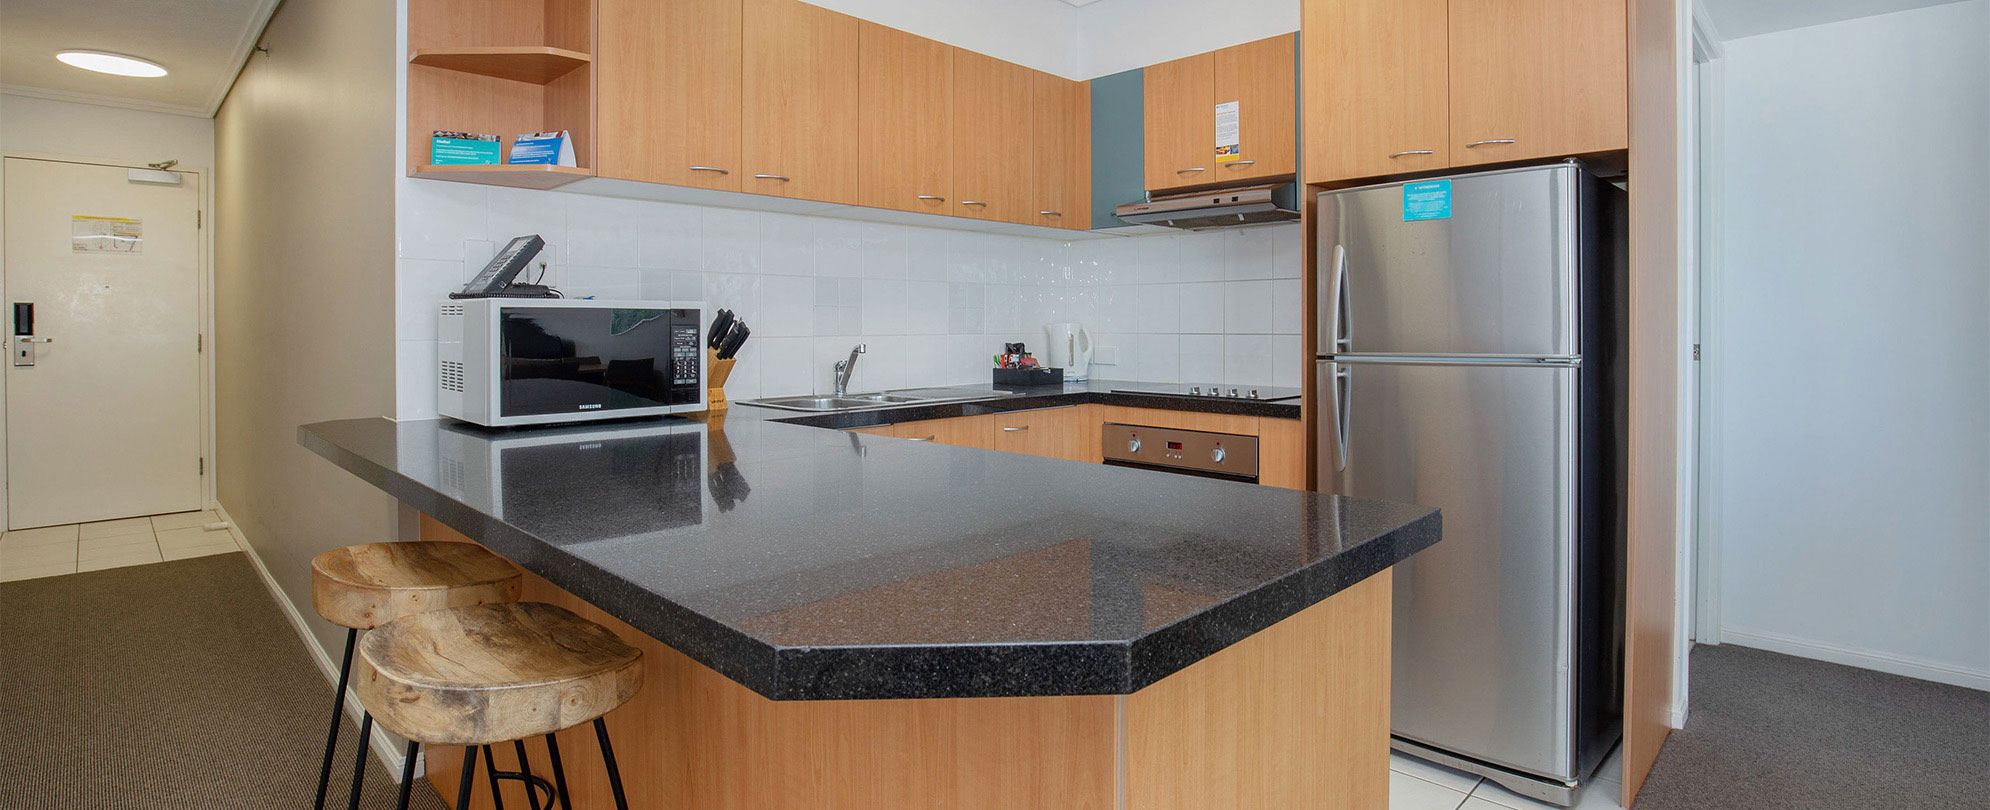 The kitchen of a Club Wyndham Kirra Beach standard suite with a fridge, microwave, stove, and countertop bar with 2 stools.